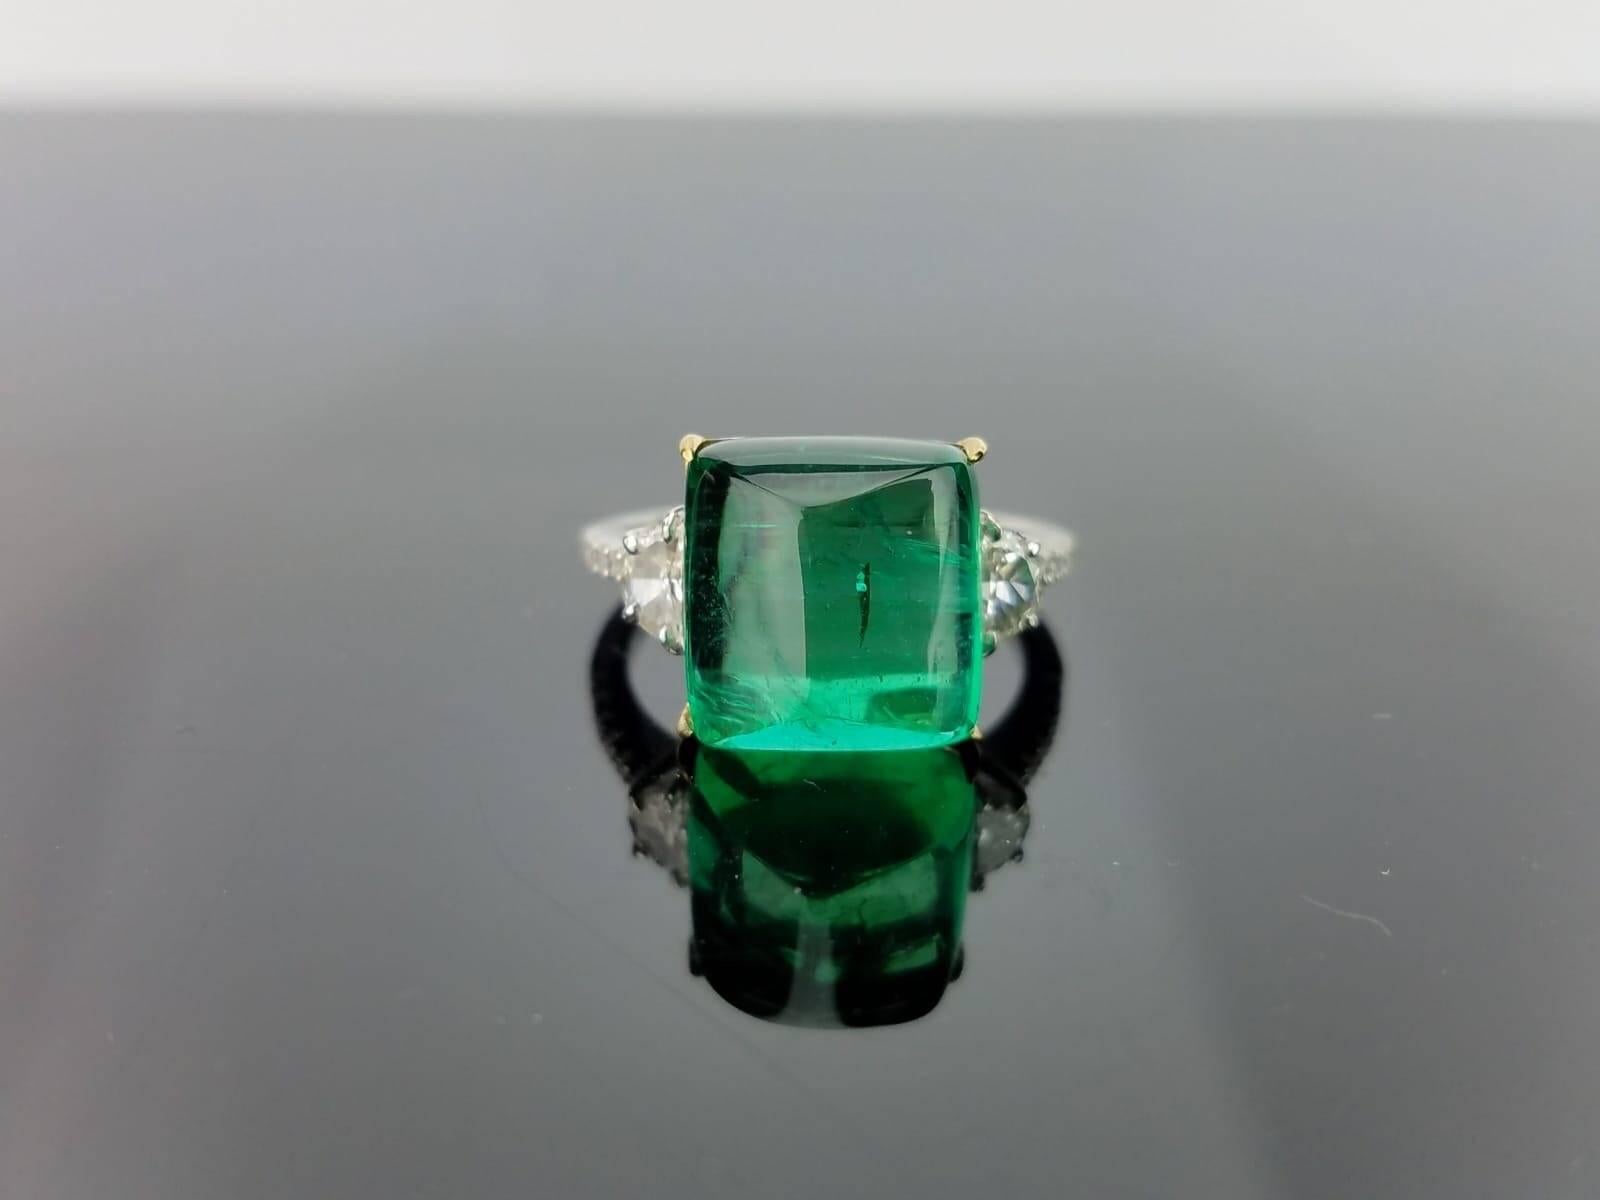 A classic three stone ring, with a 9.43-carat high quality and clarity Zambian Emerald centre stone and 2 half-moon side stones and 18K gold diamond band. 

Stone Details: 
Stone: Emerald
Carat Weight: 9.43 Carats

Diamond Details: 
Total Carat